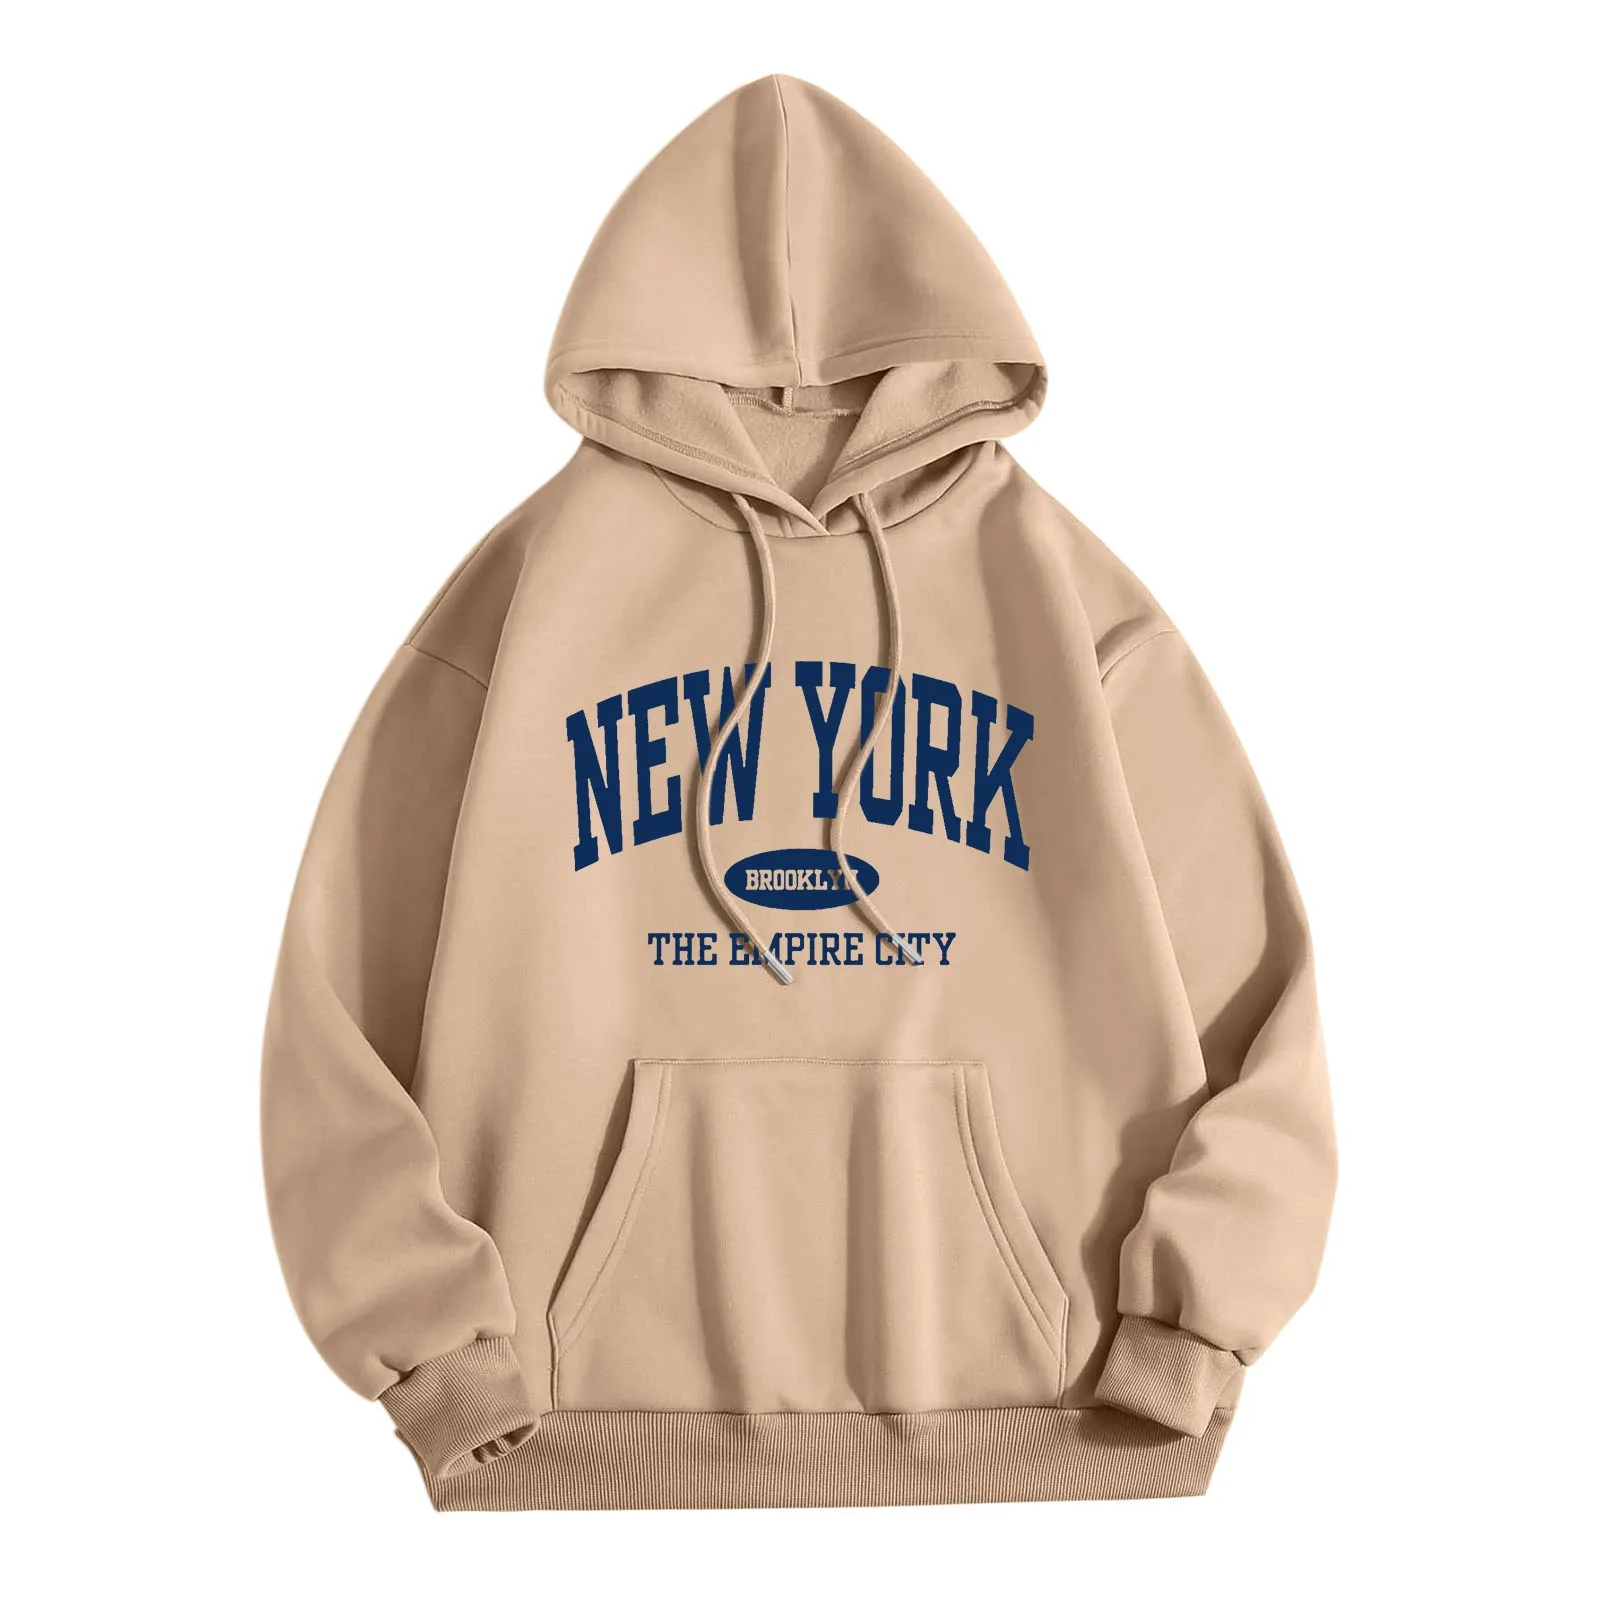 

Fleece Soft Pullover Crewneck Loose Female Tops Clothes New York Queens Letter Printed Hoodies Street Fashion Women Sweatshirts